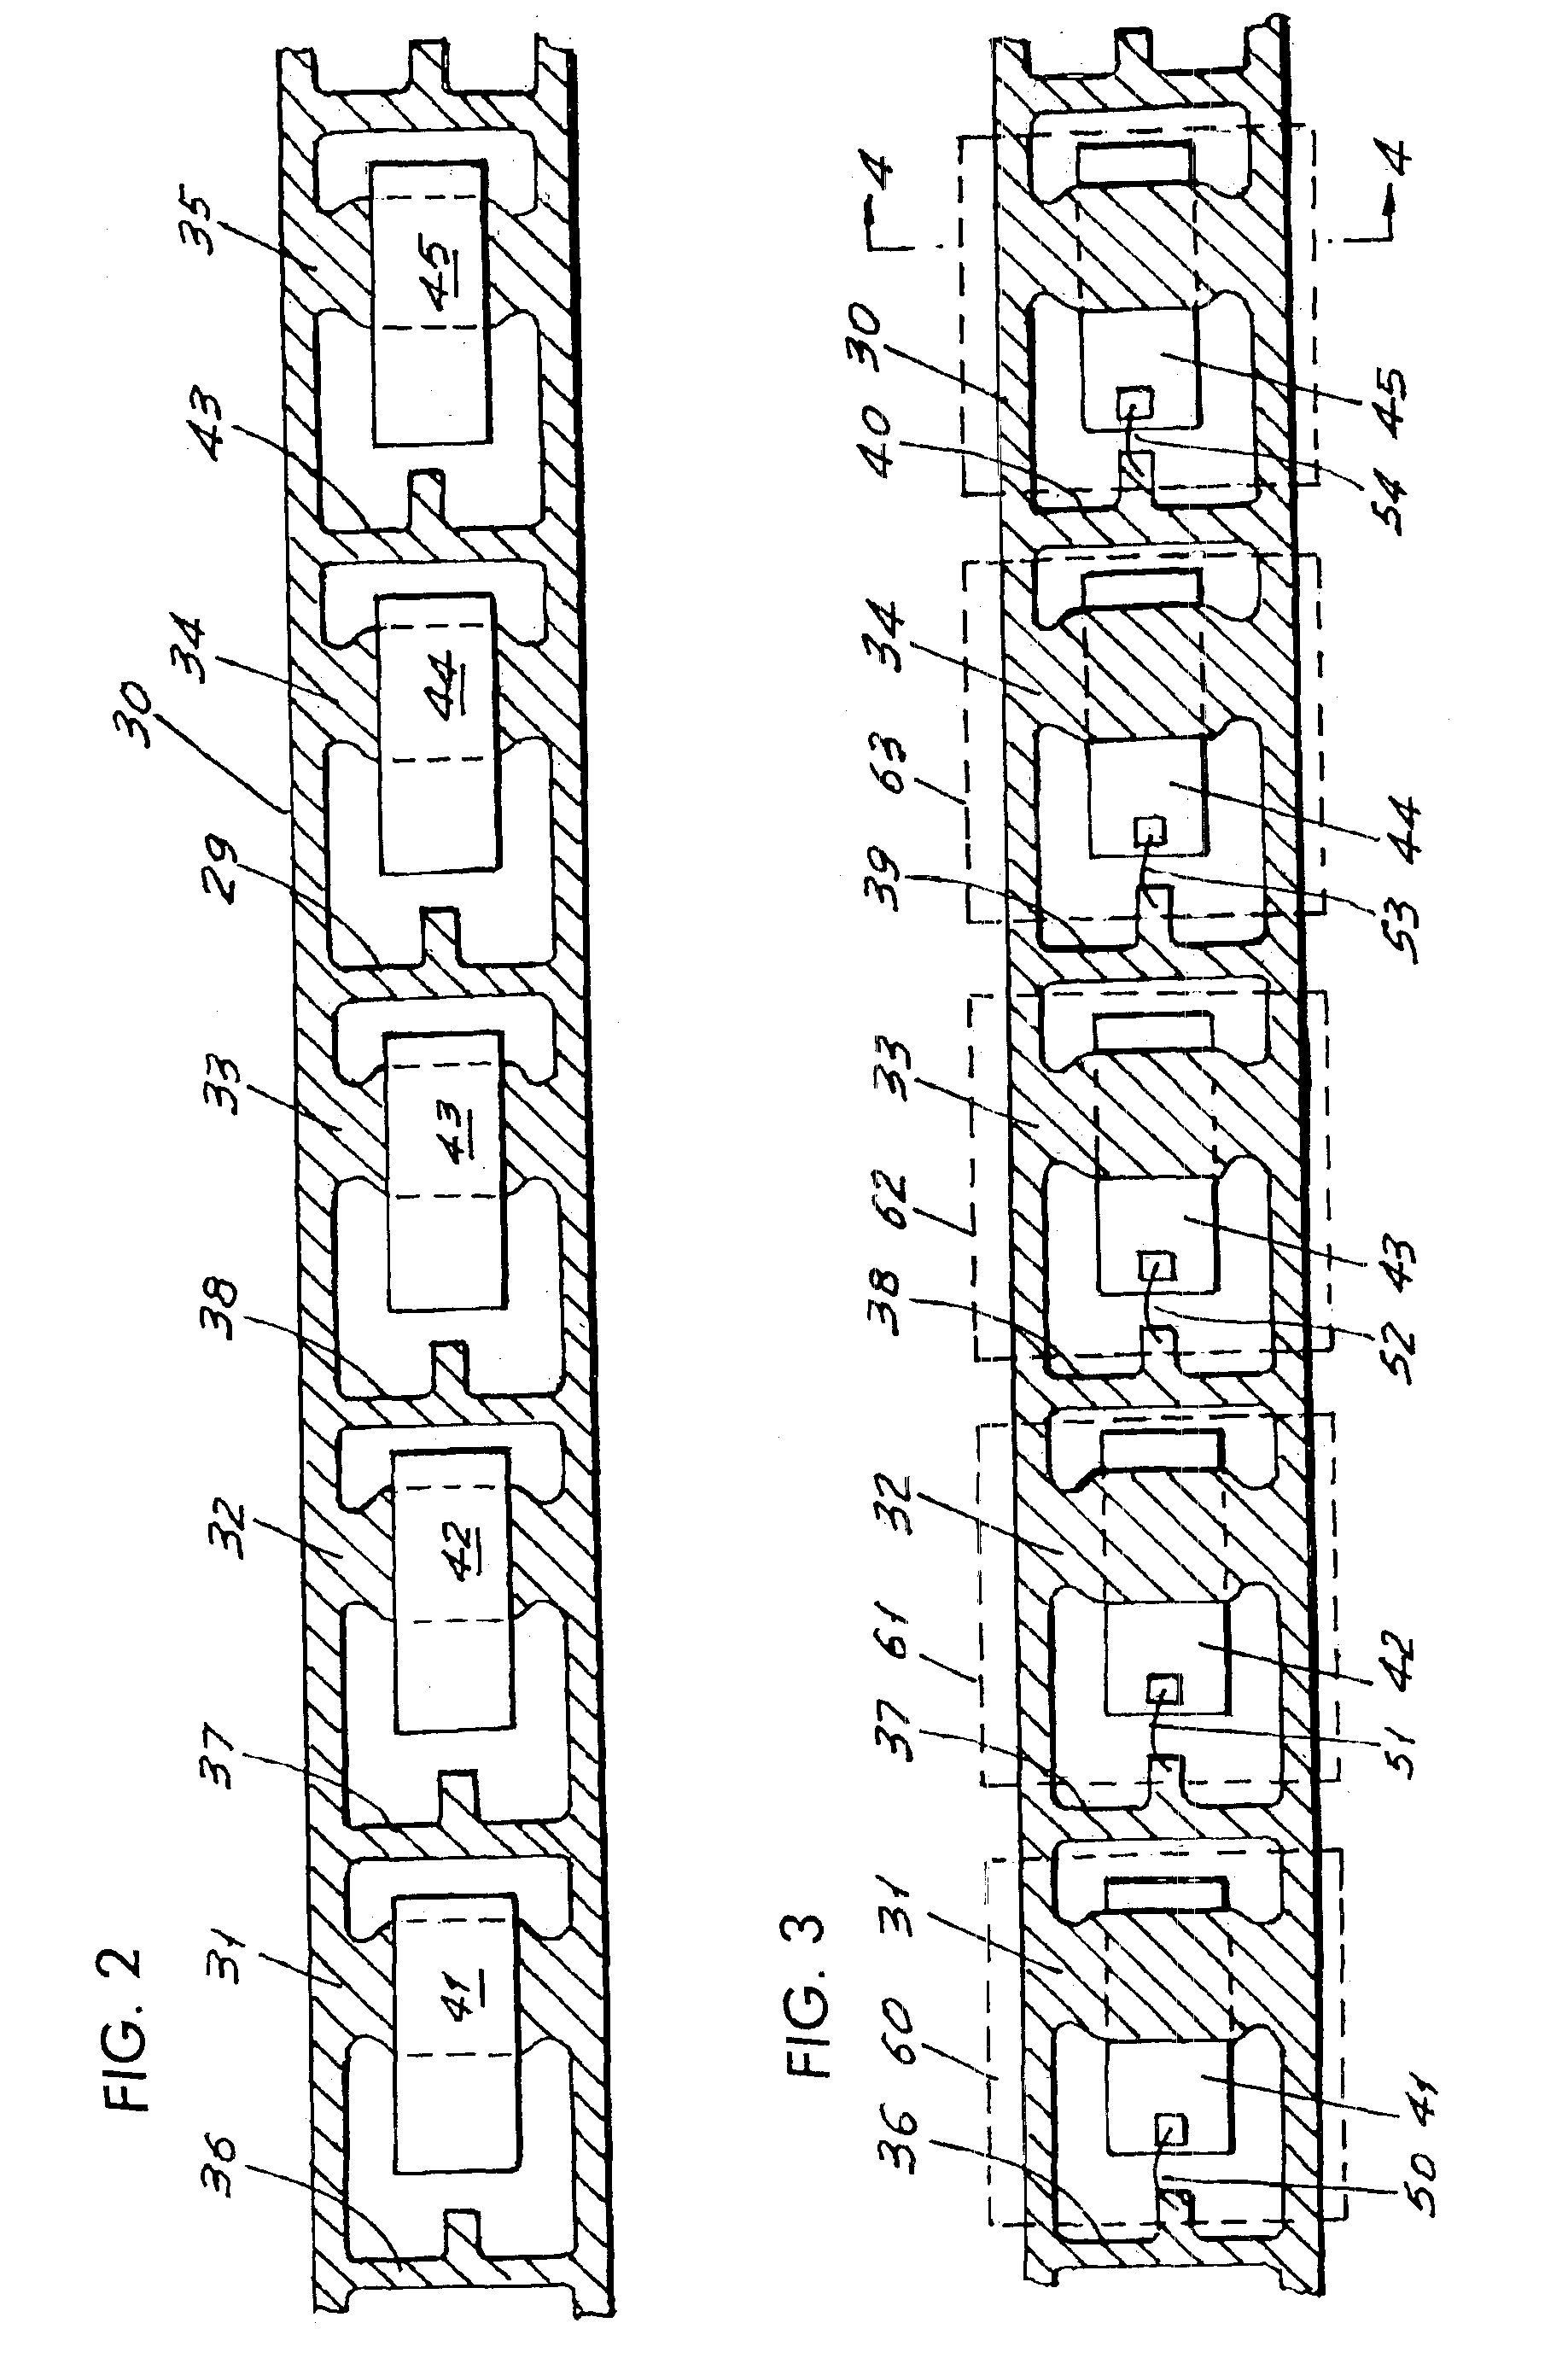 Clip-type lead frame for source mounted die